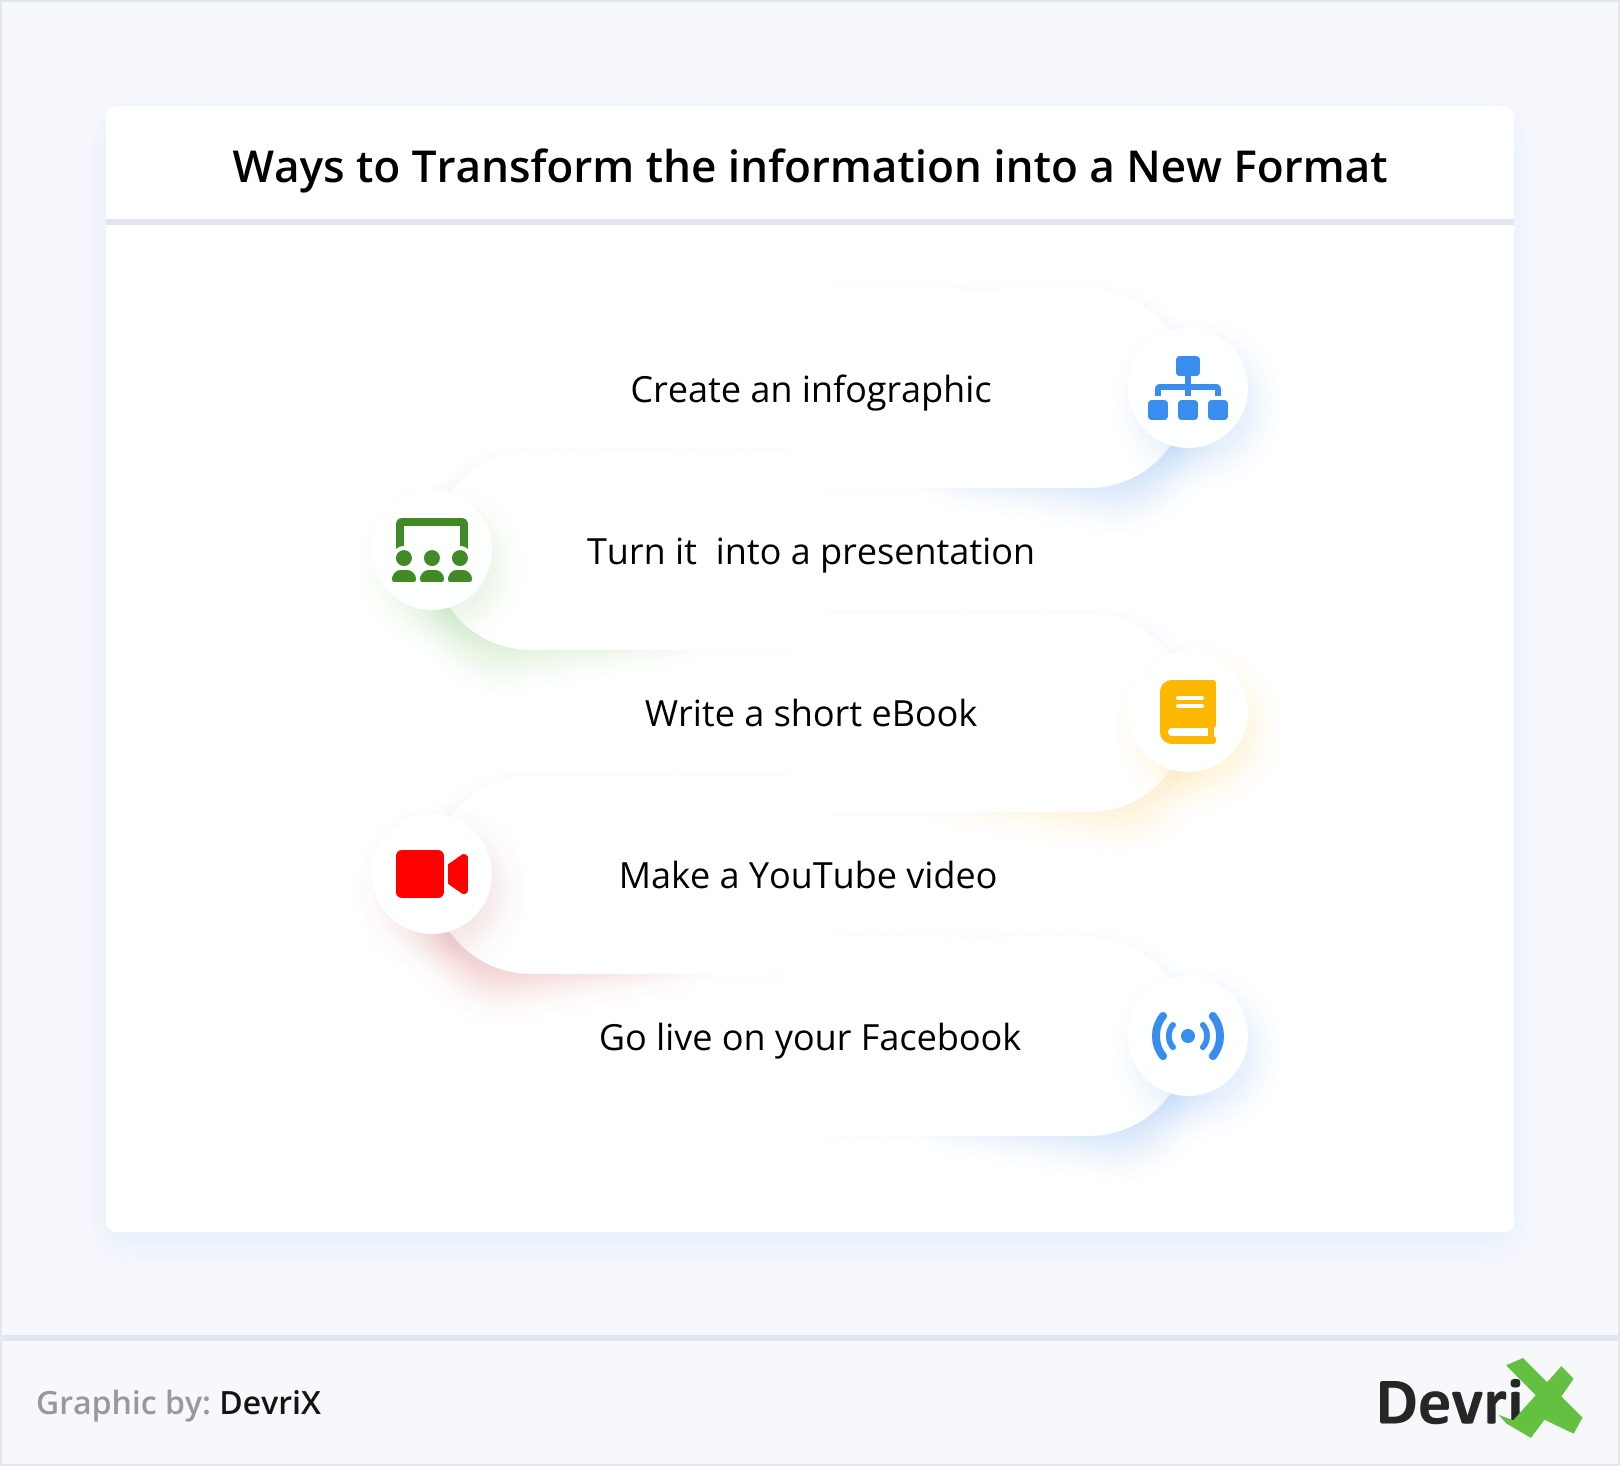 Ways to Transform the information into a New Format